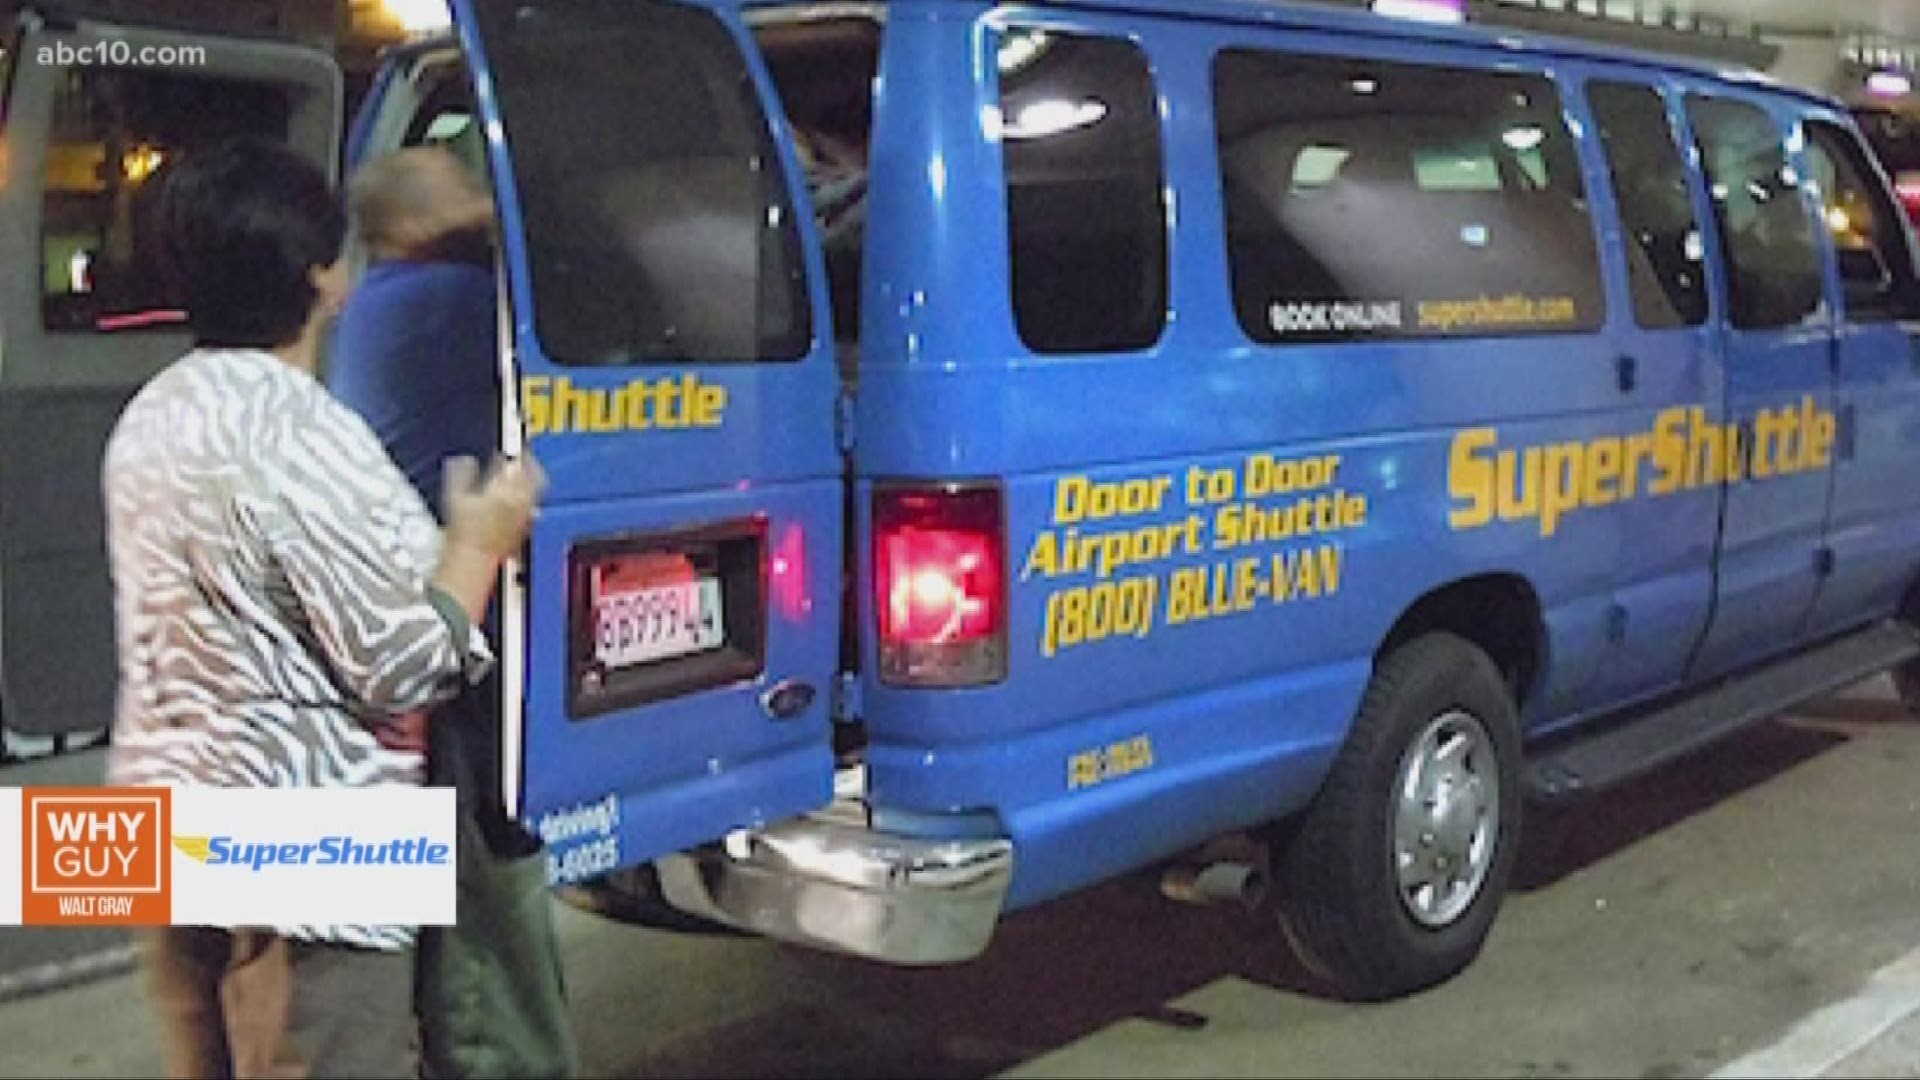 The Sacramento-area ridesharing pioneer's recognizable blue and yellow vans have been a staple of getting people to and from airports for years.